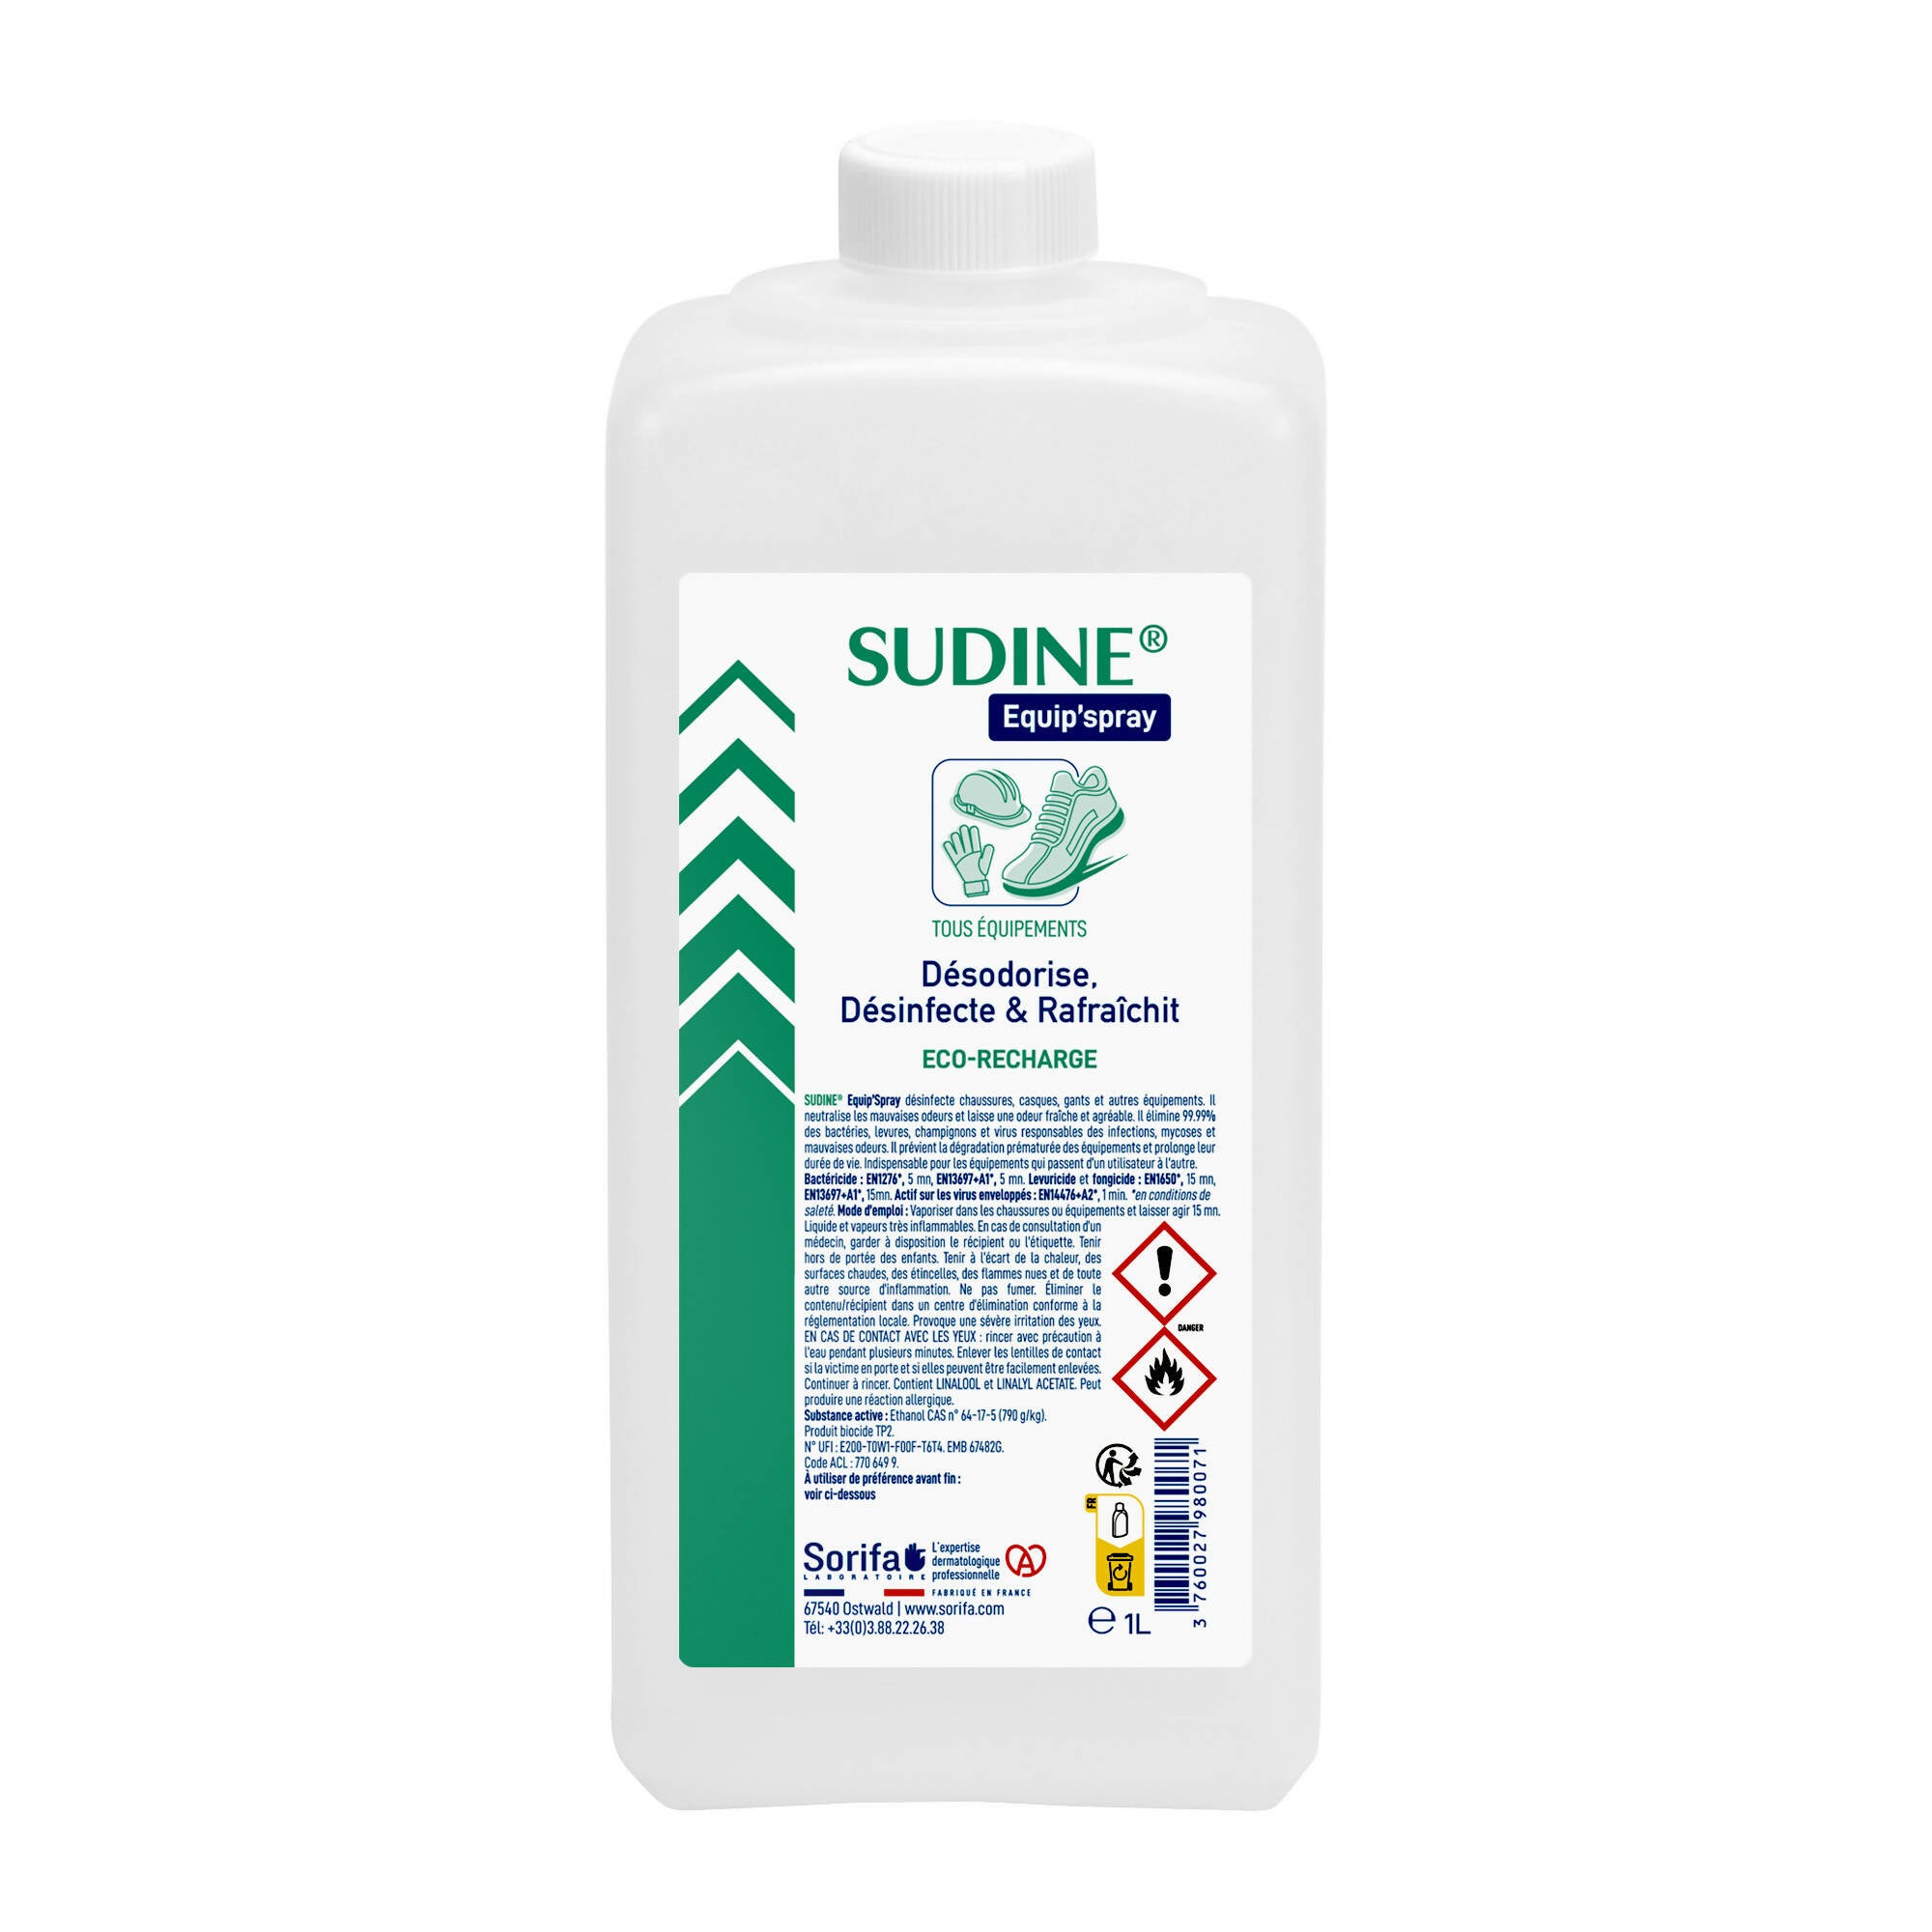 SORIFA - Complete box of 12 - Sudine Equip'spray - Deodorizes, disinfects, refreshes - Shoes, helmets, gloves, equipment - 1L refill for SUDINE Equip'spray 50 and 125 ml or for the 1L SORIFA Spray - 0